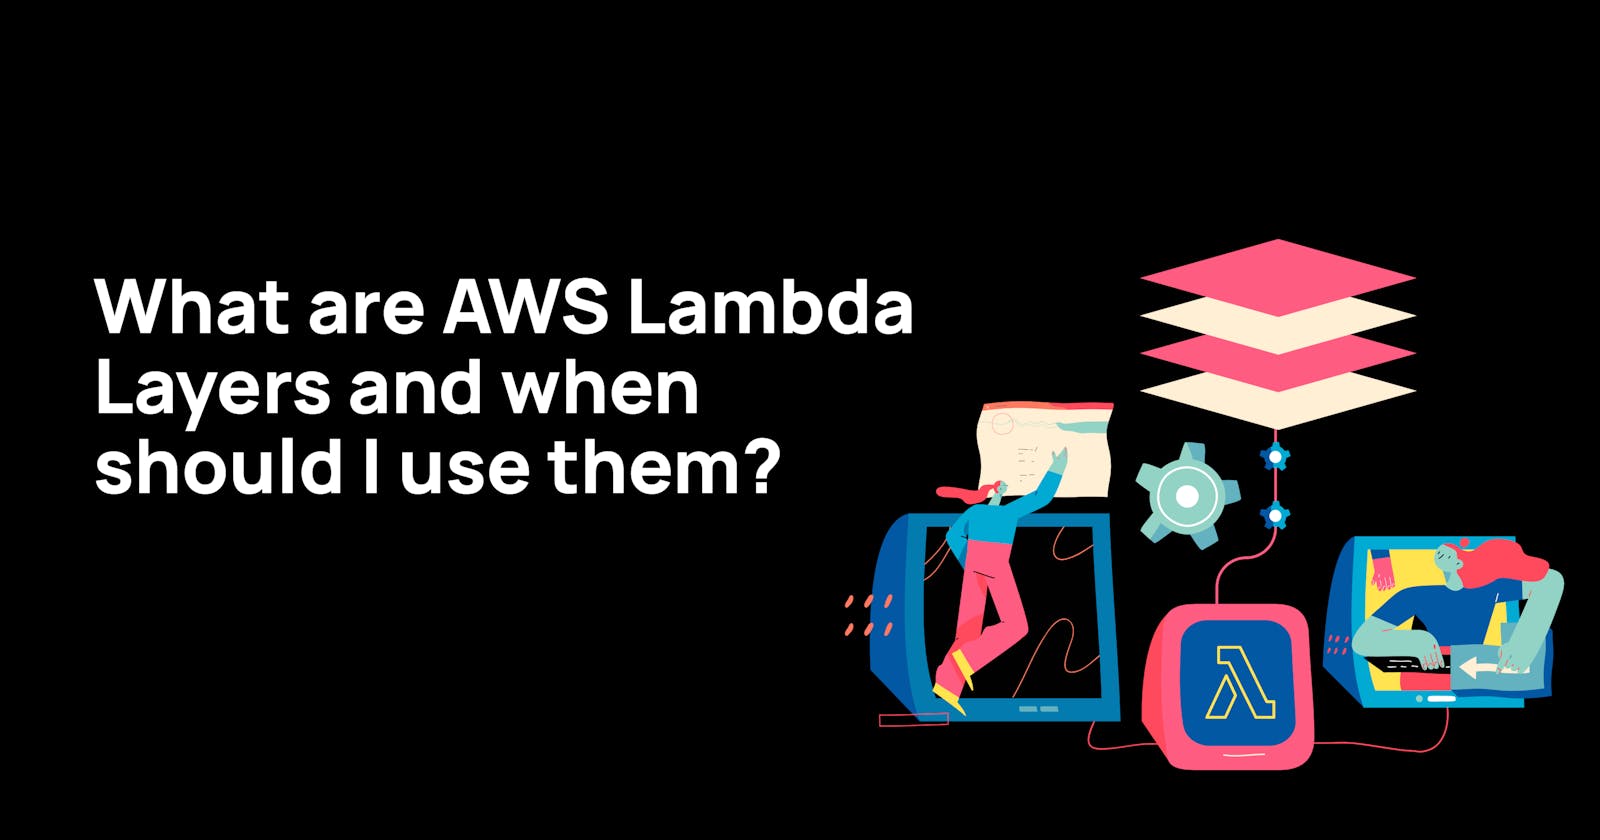 What are AWS Lambda Layers and when should I use them?